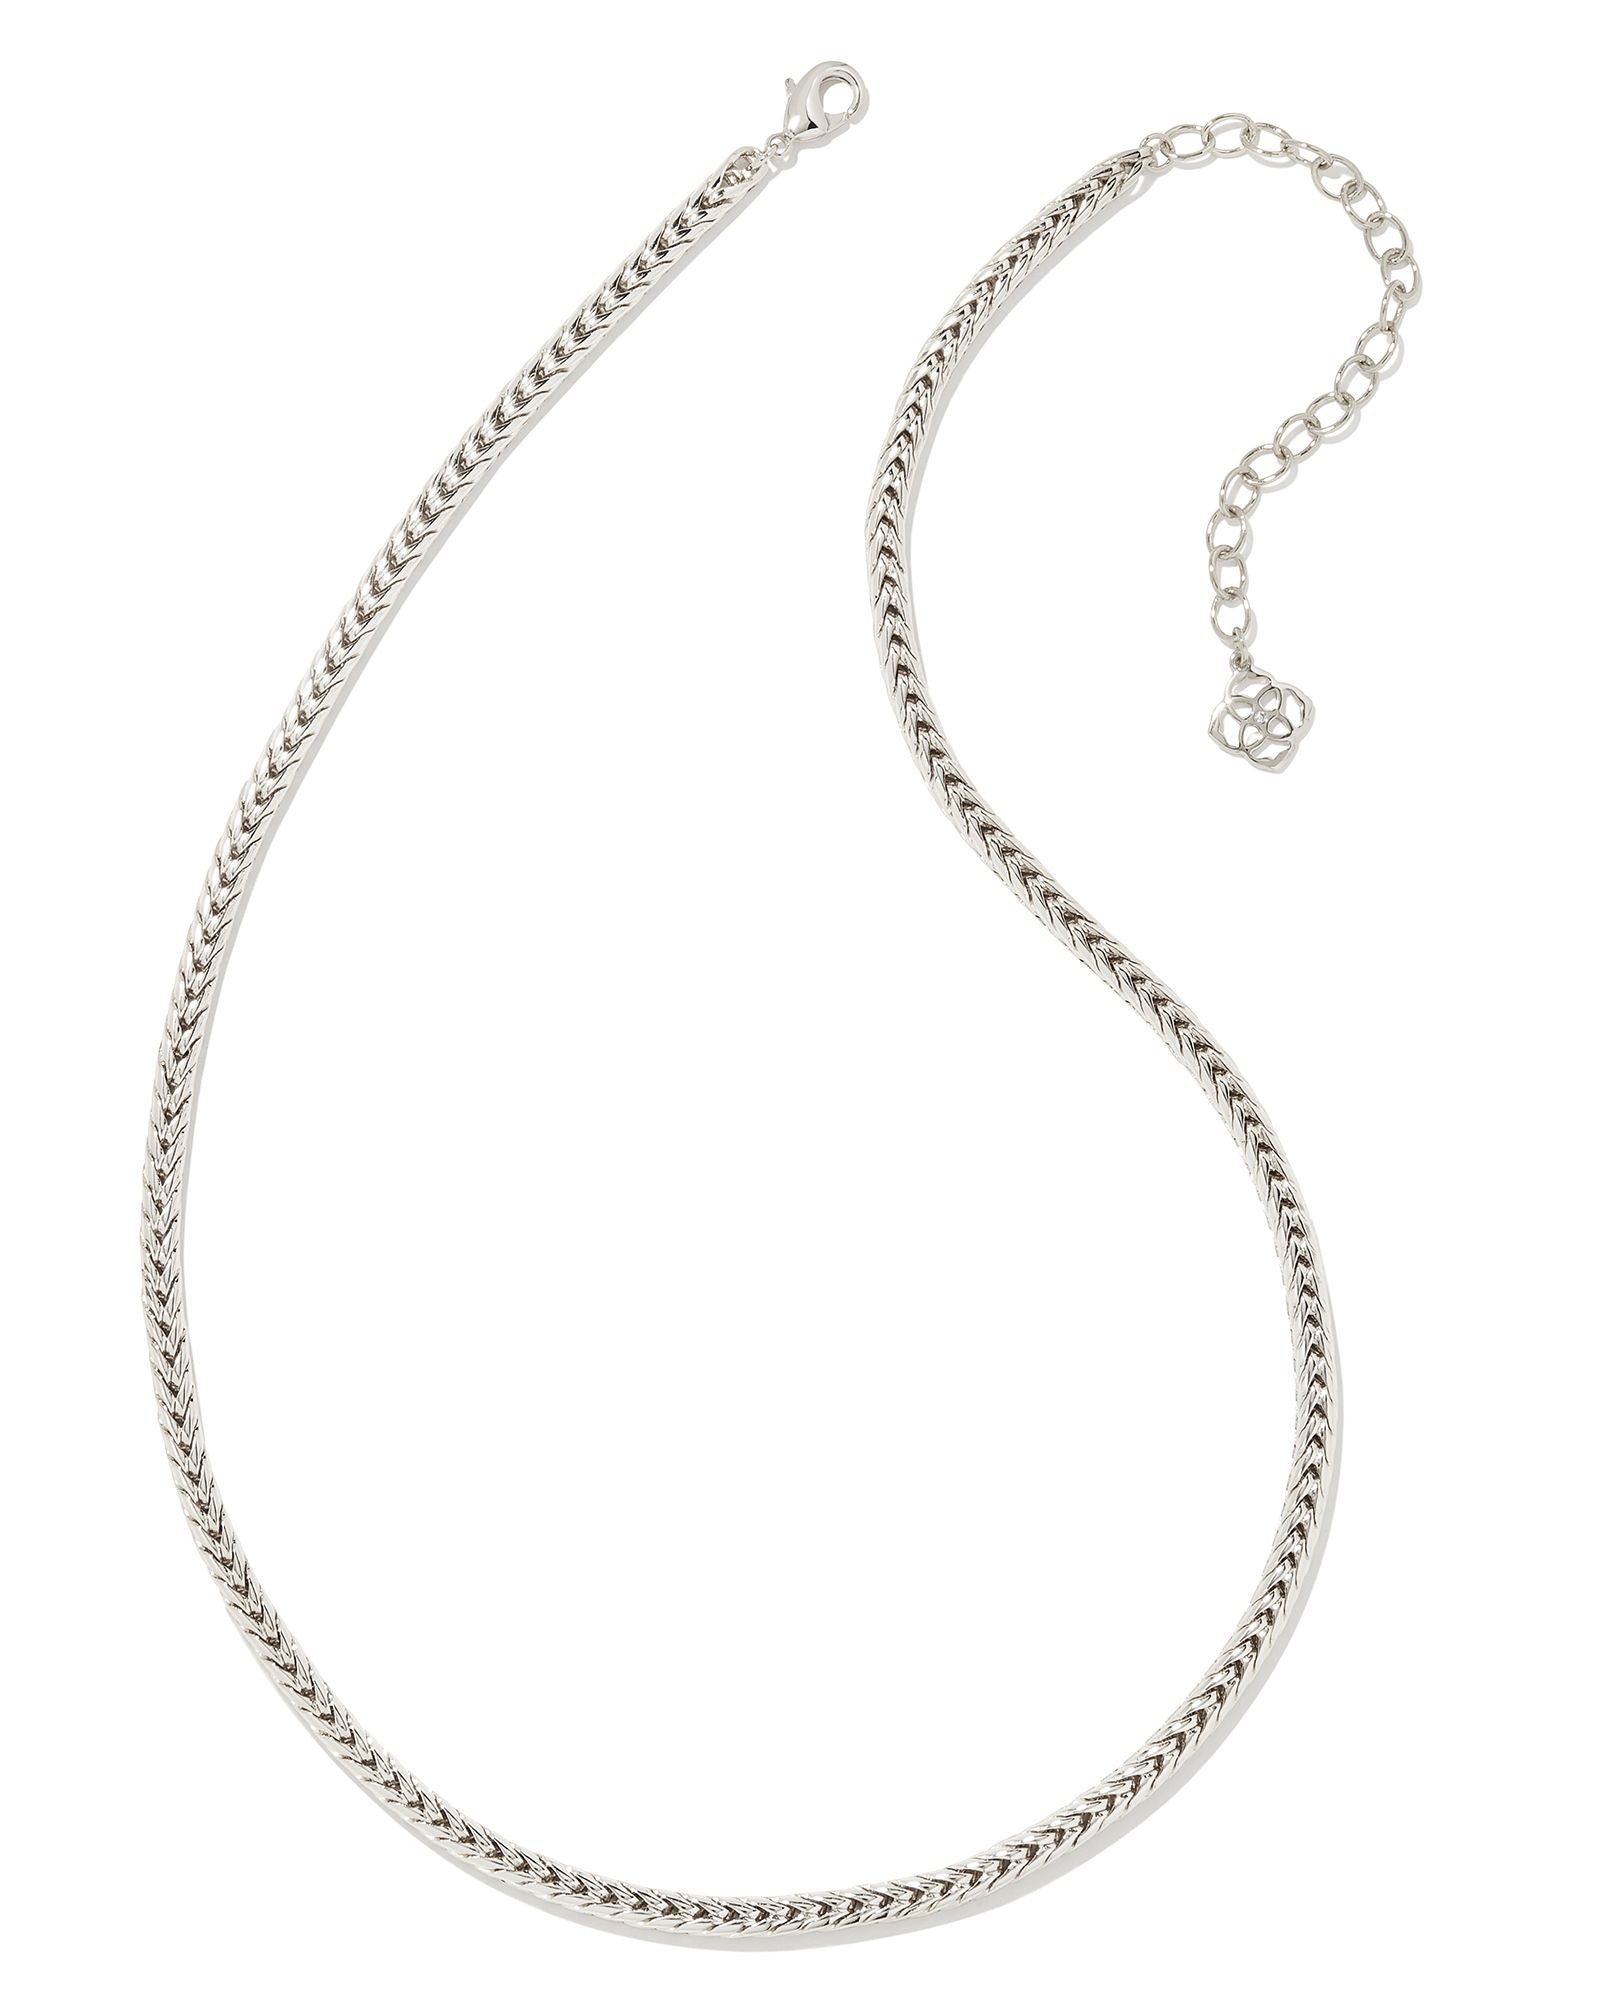 Sale Kinsley Chain Necklace Gold or Silver